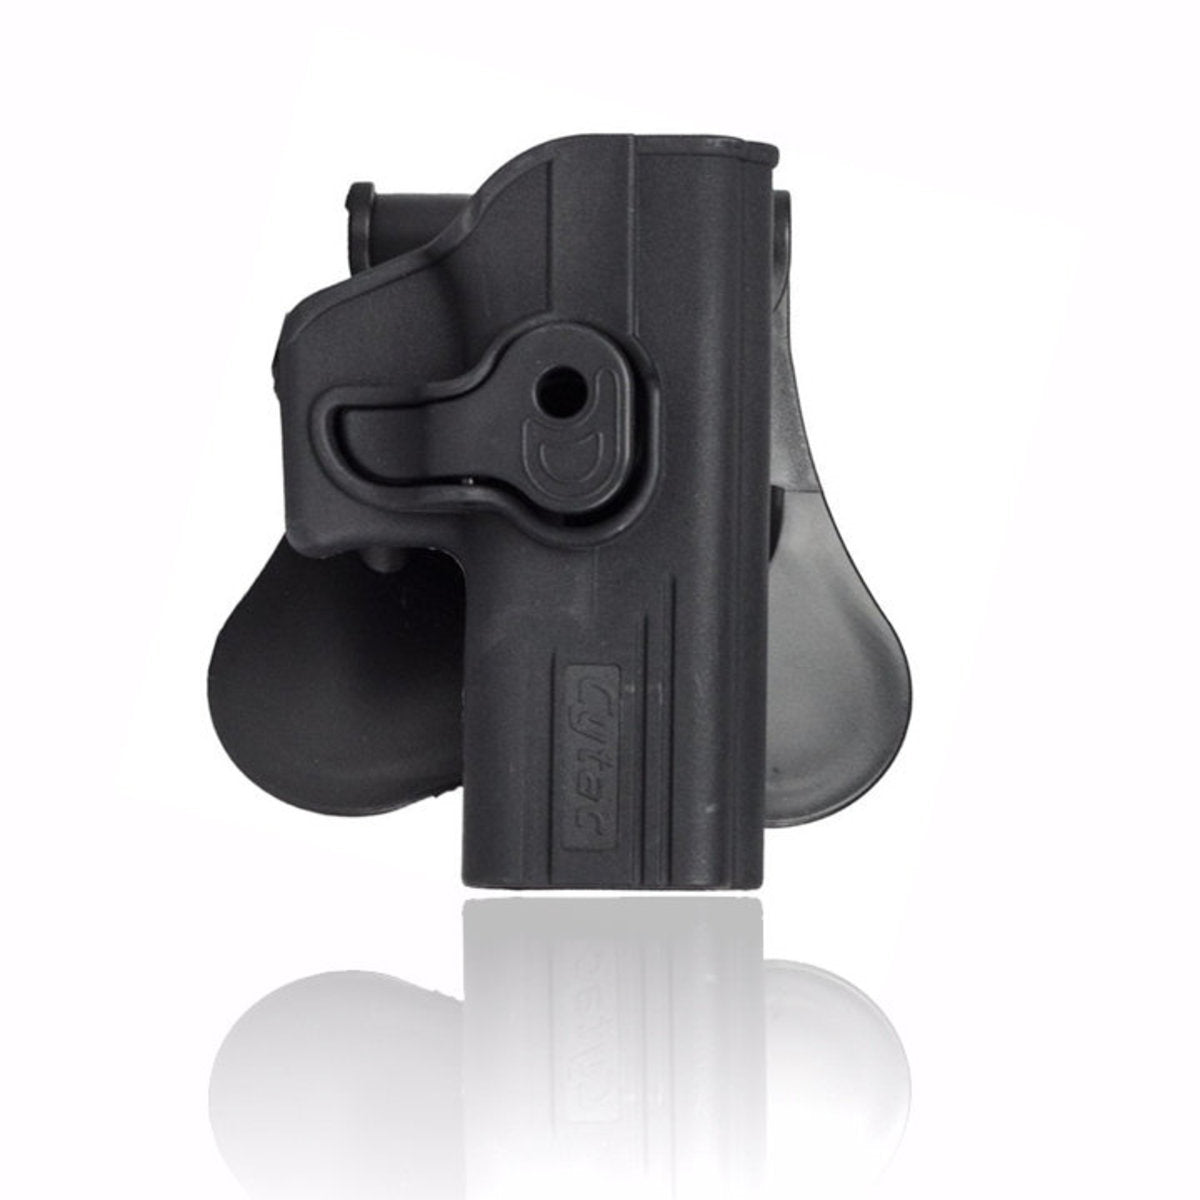 Cytac OWB Holster - Fits GLOCK Airsoft Pistols - Eminent Paintball And Airsoft